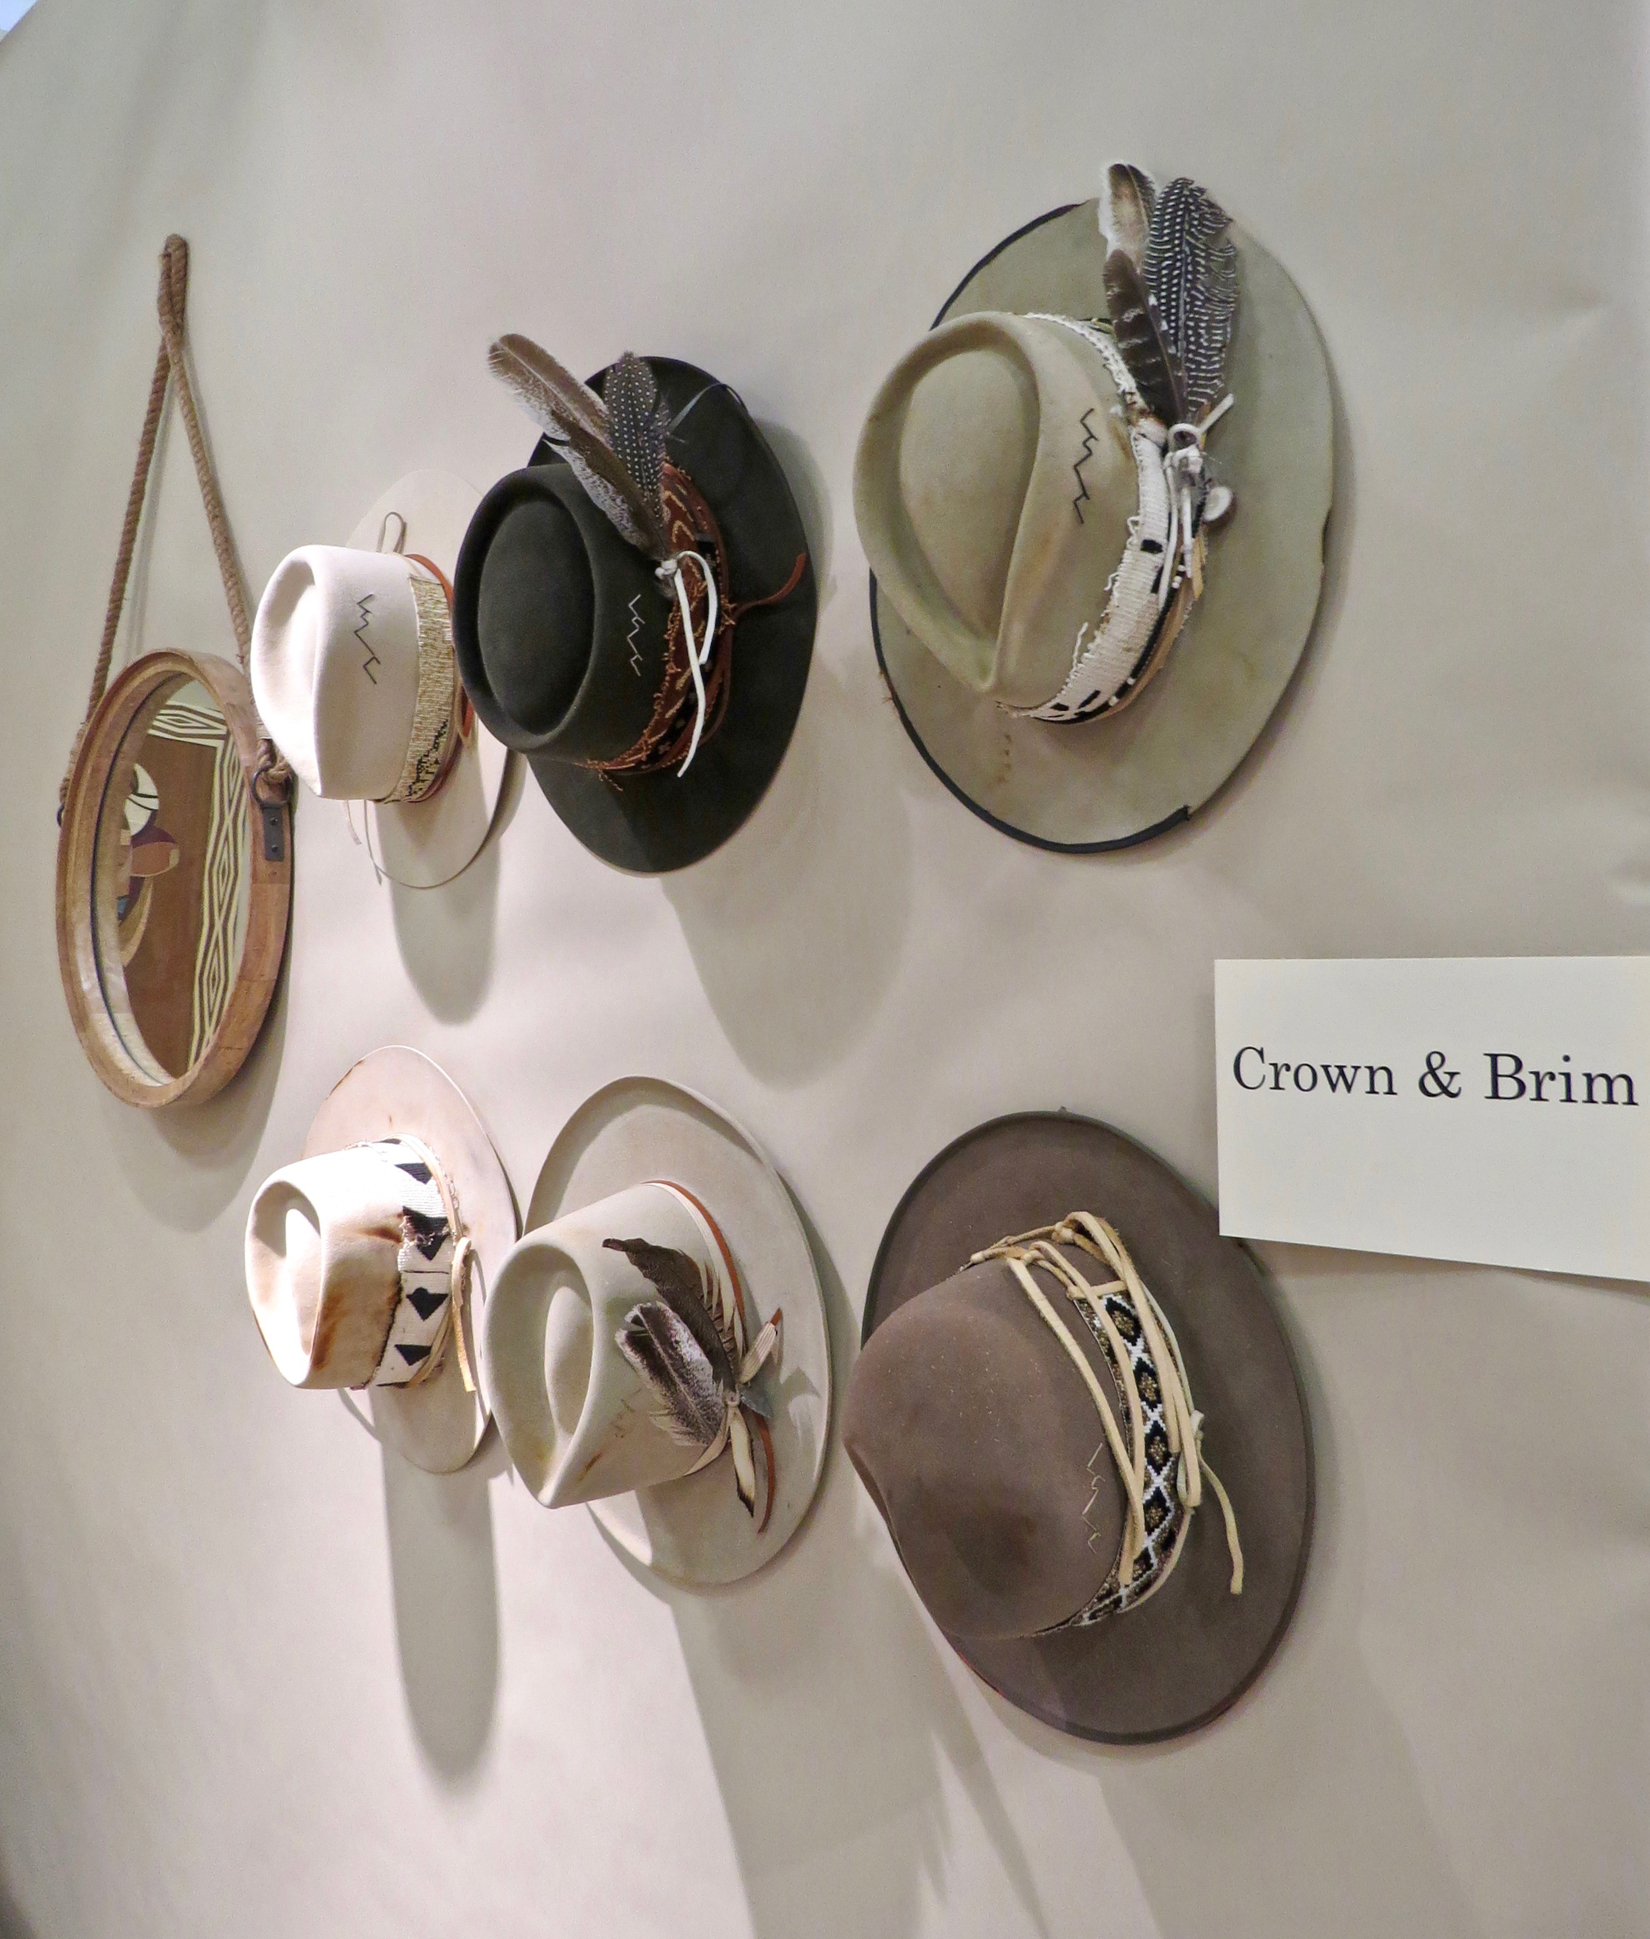 Functional art to wear, like these one-of-a-kind hats from Crown & Brim, is always popular with the more than 4,000 guests that attend the Western Design Exhibit + Sale annually.